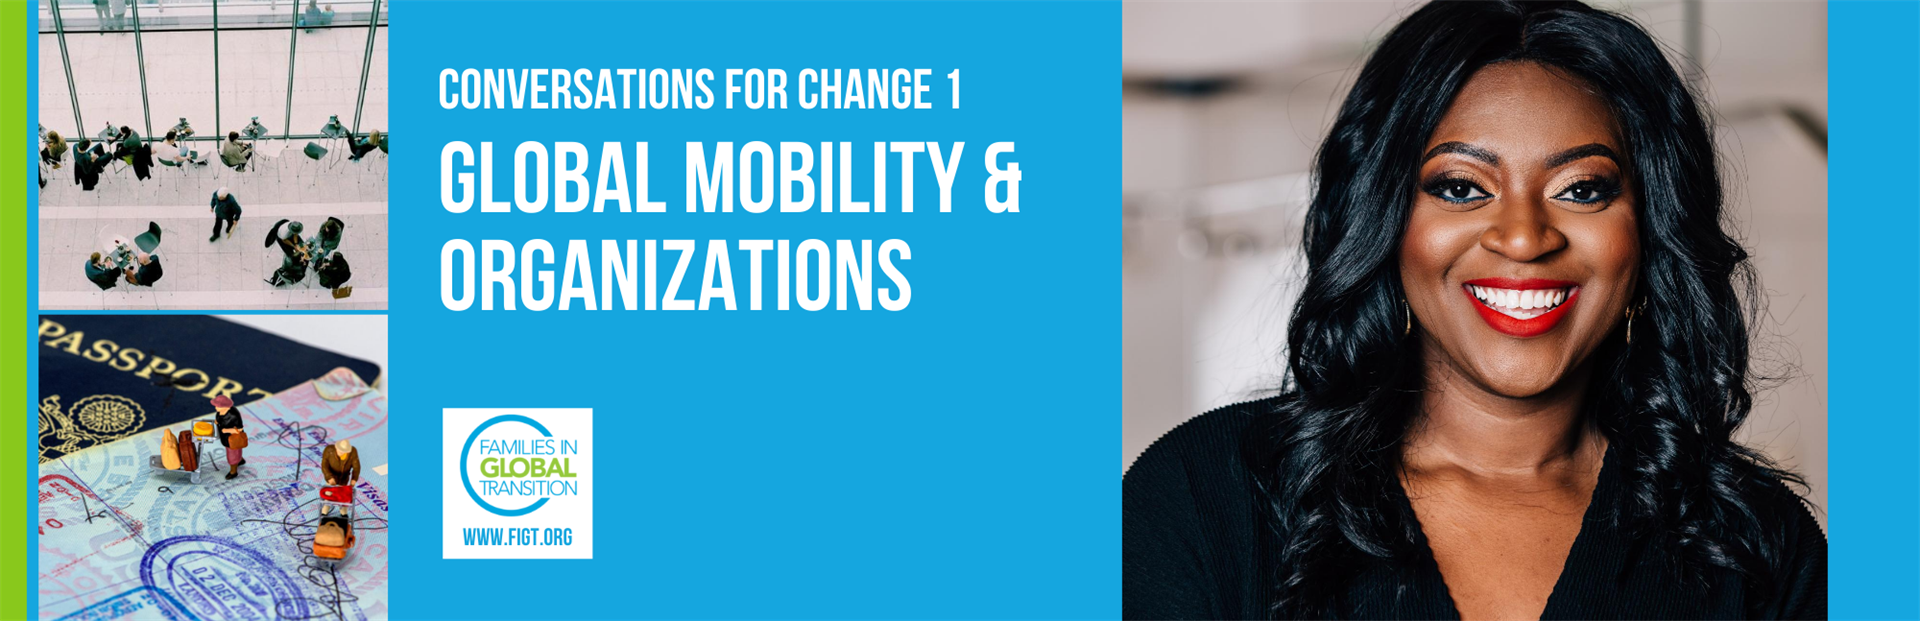 Blog title: global mobility and organizations